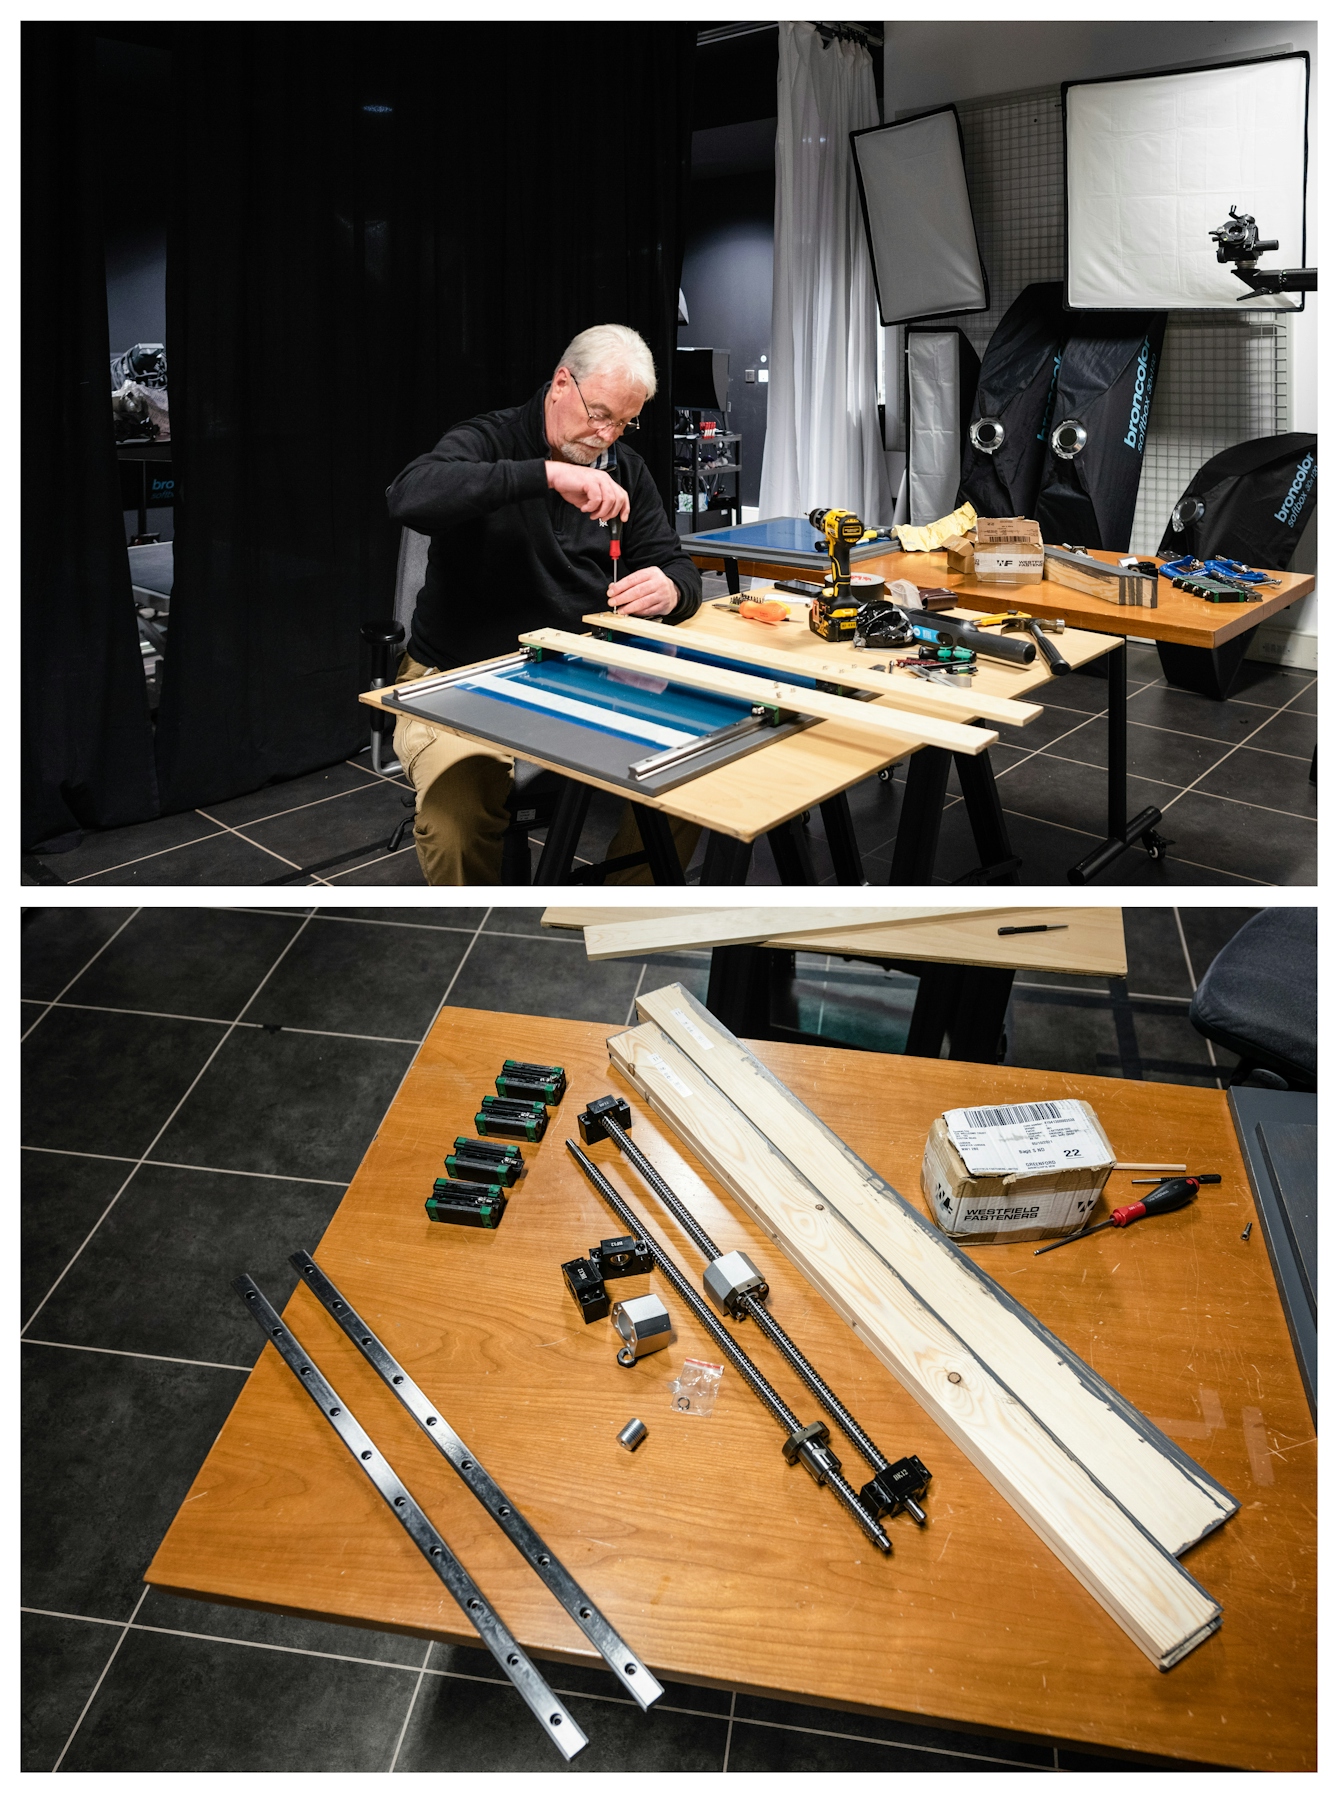 Photographic diptych. The image on the top shows a man seated at a table in a photographic studio. On the table are various hand tools and he is in the process of using a screwdriver. The image on the bottom shows a close-up of the table with wood and metal mechanical elements laid out.